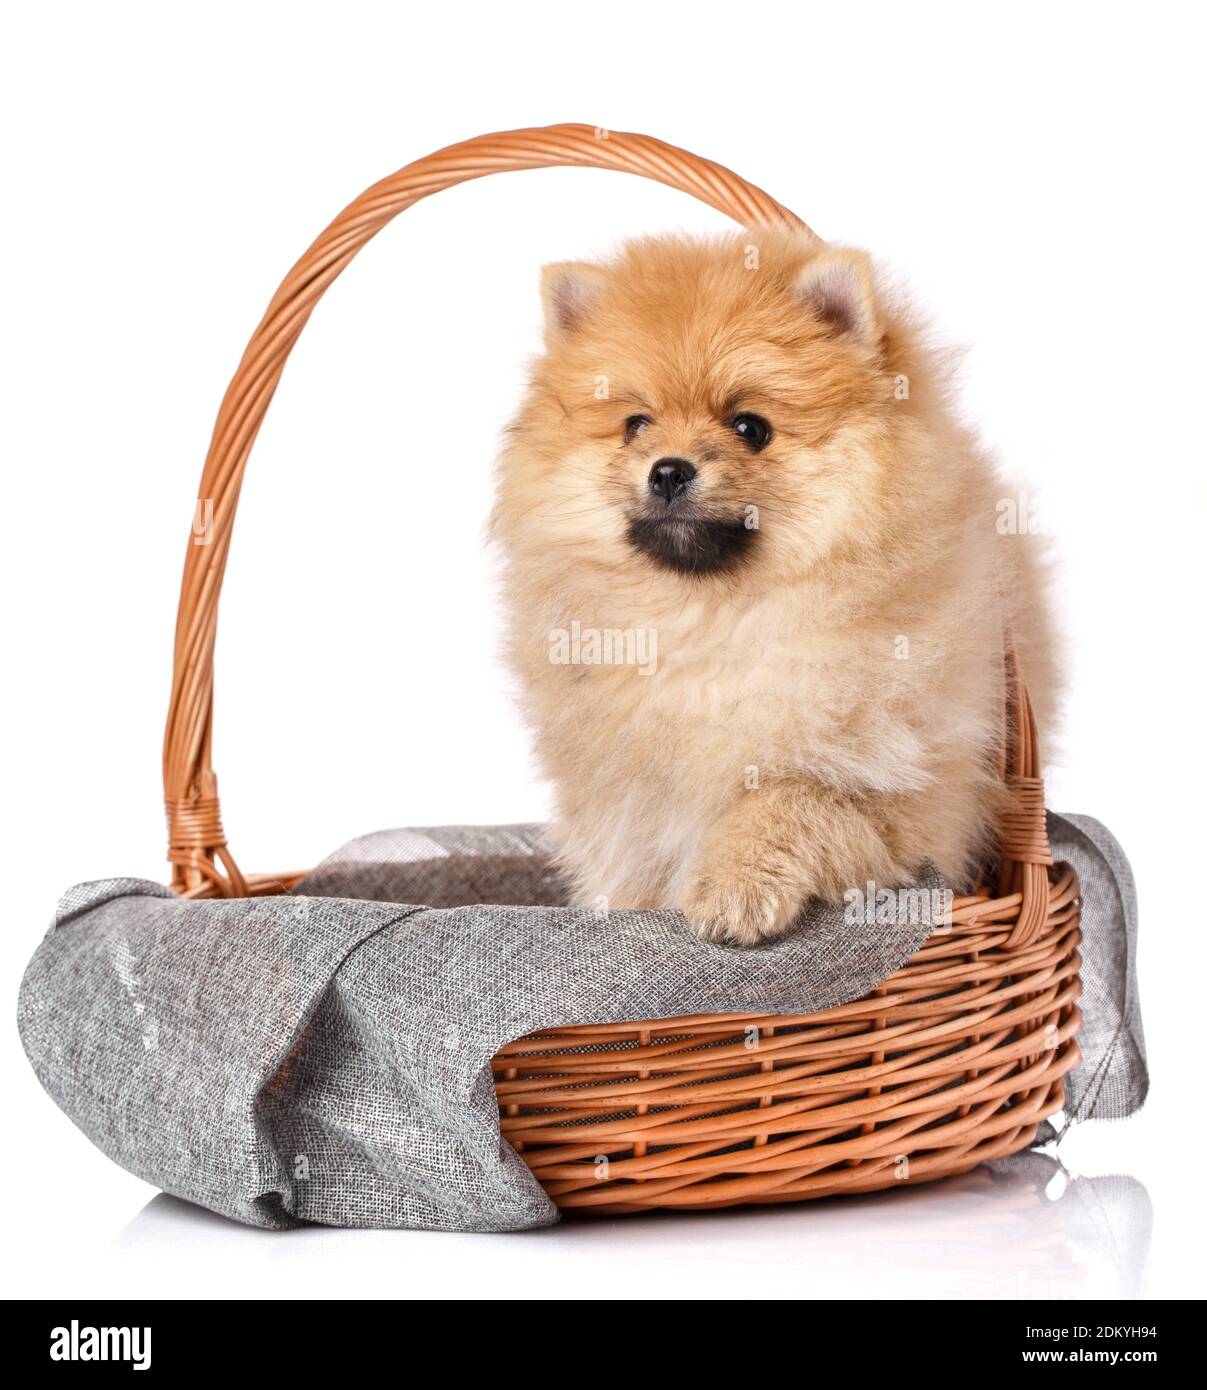 Pomeranian Spitz puppy looking aside while sitting in a wicker basket. Stock Photo